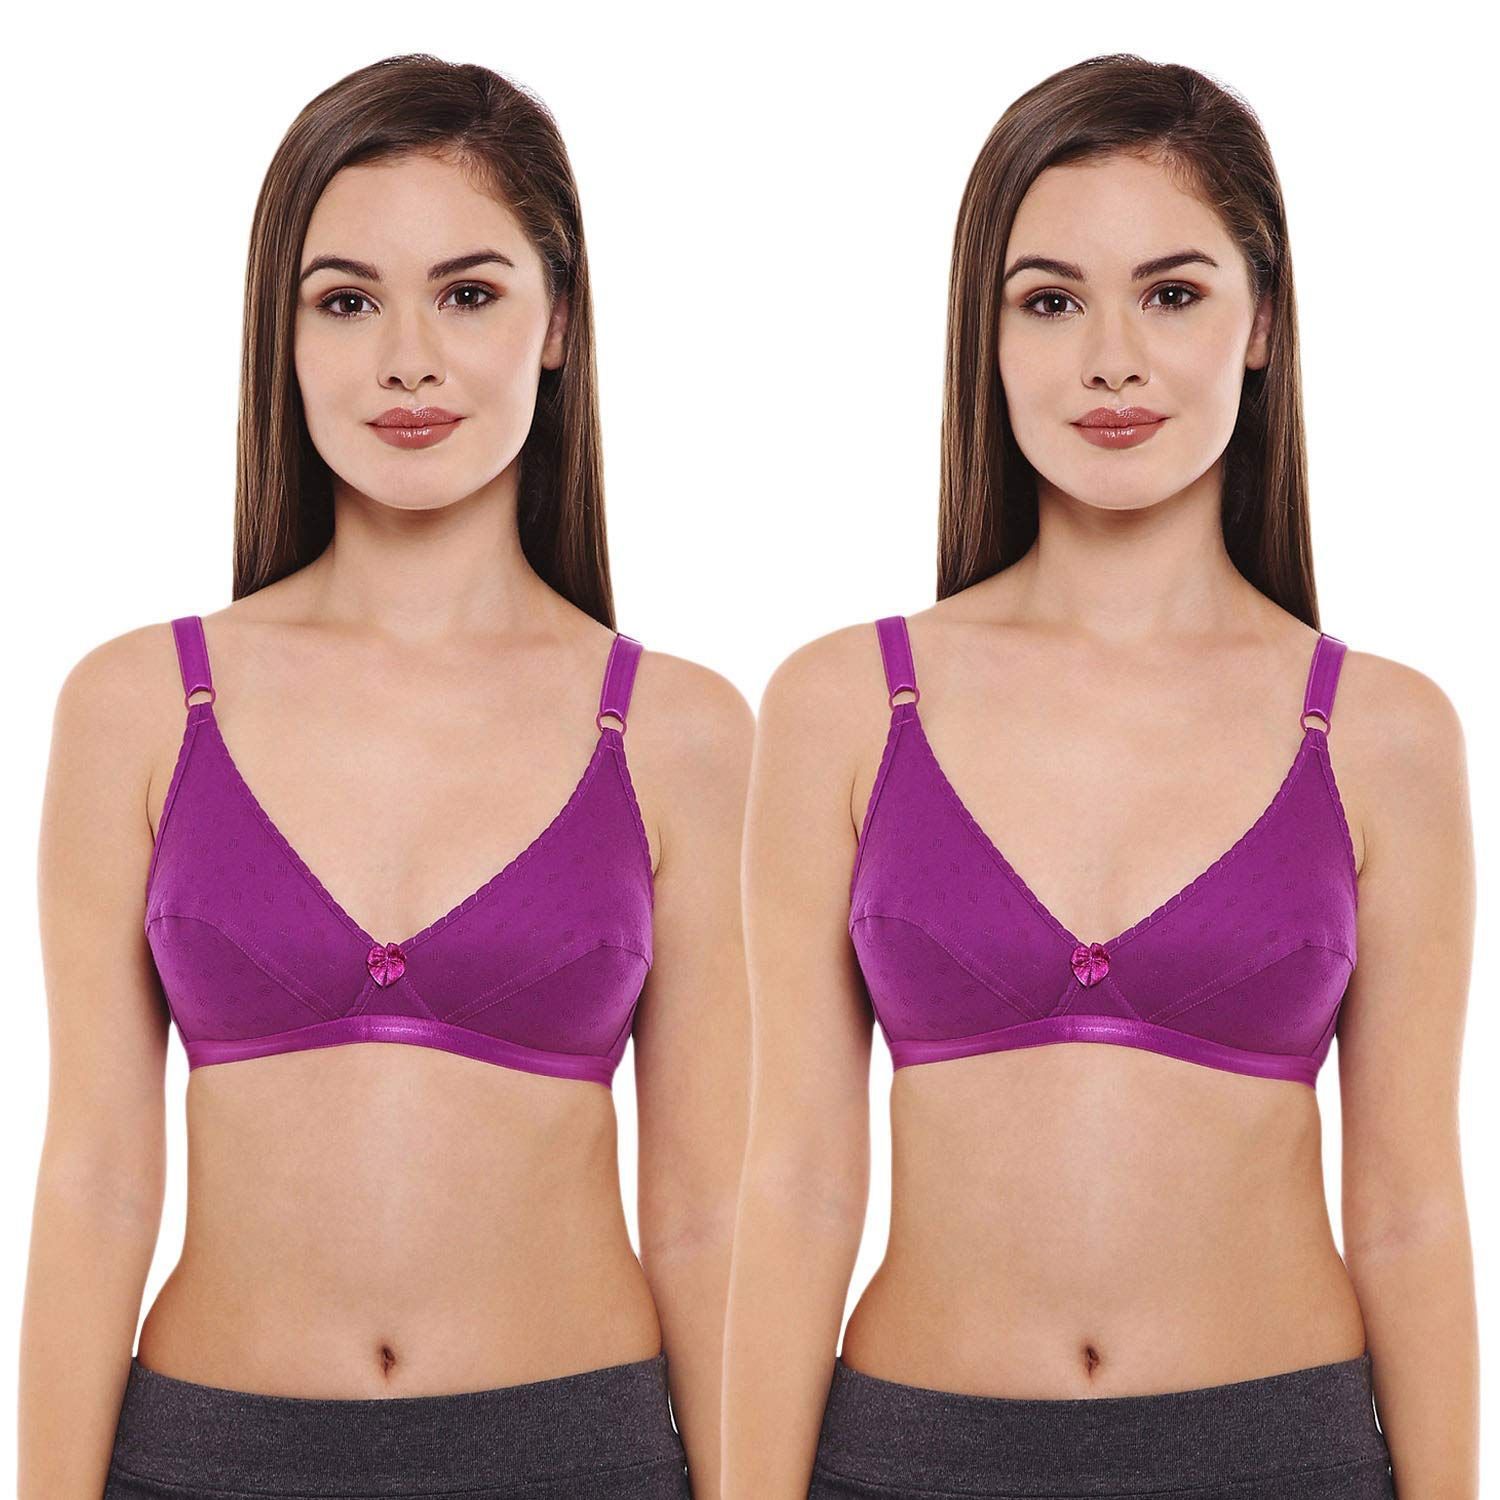 BODYCARE Women's Cotton Solid Color Seamed Bra in Pack of 2